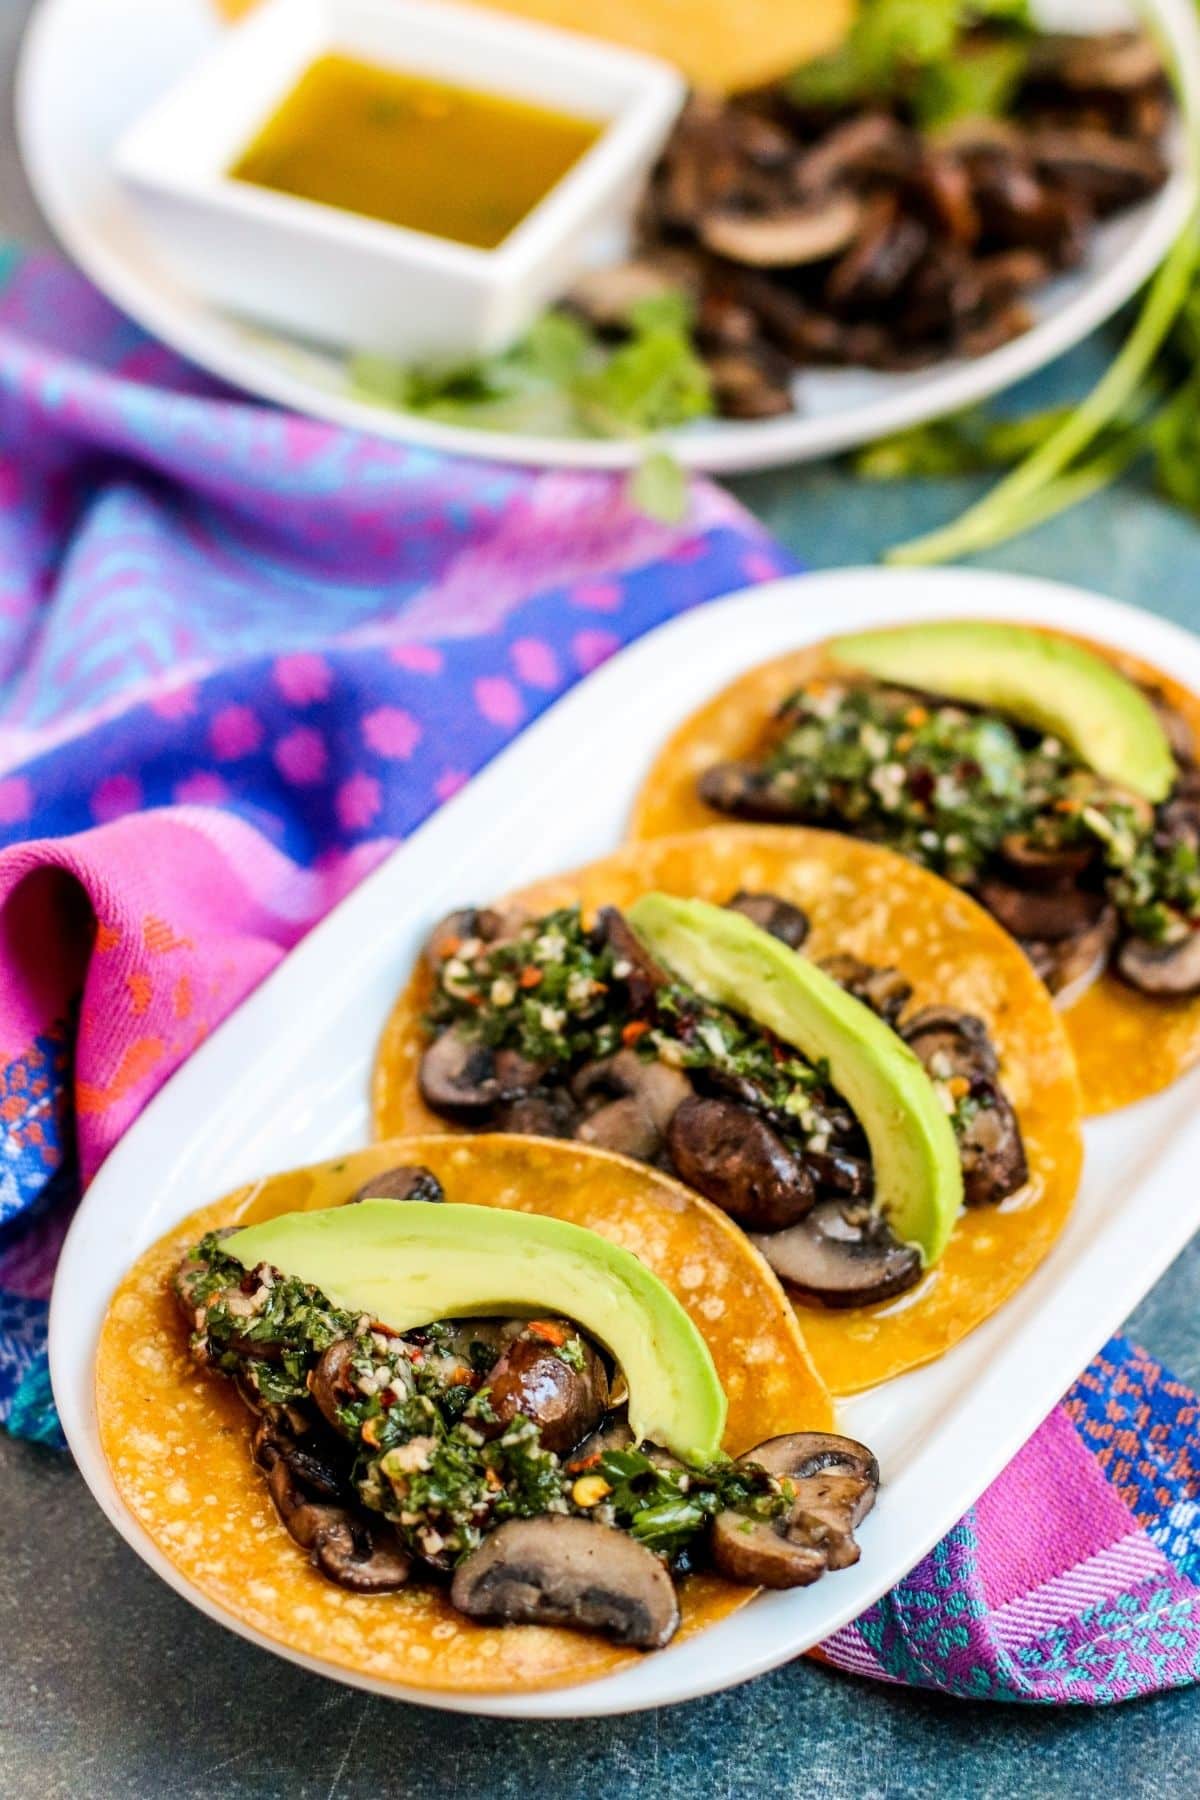 Platter of mushroom tacos topped with herb sauce and avocado slices